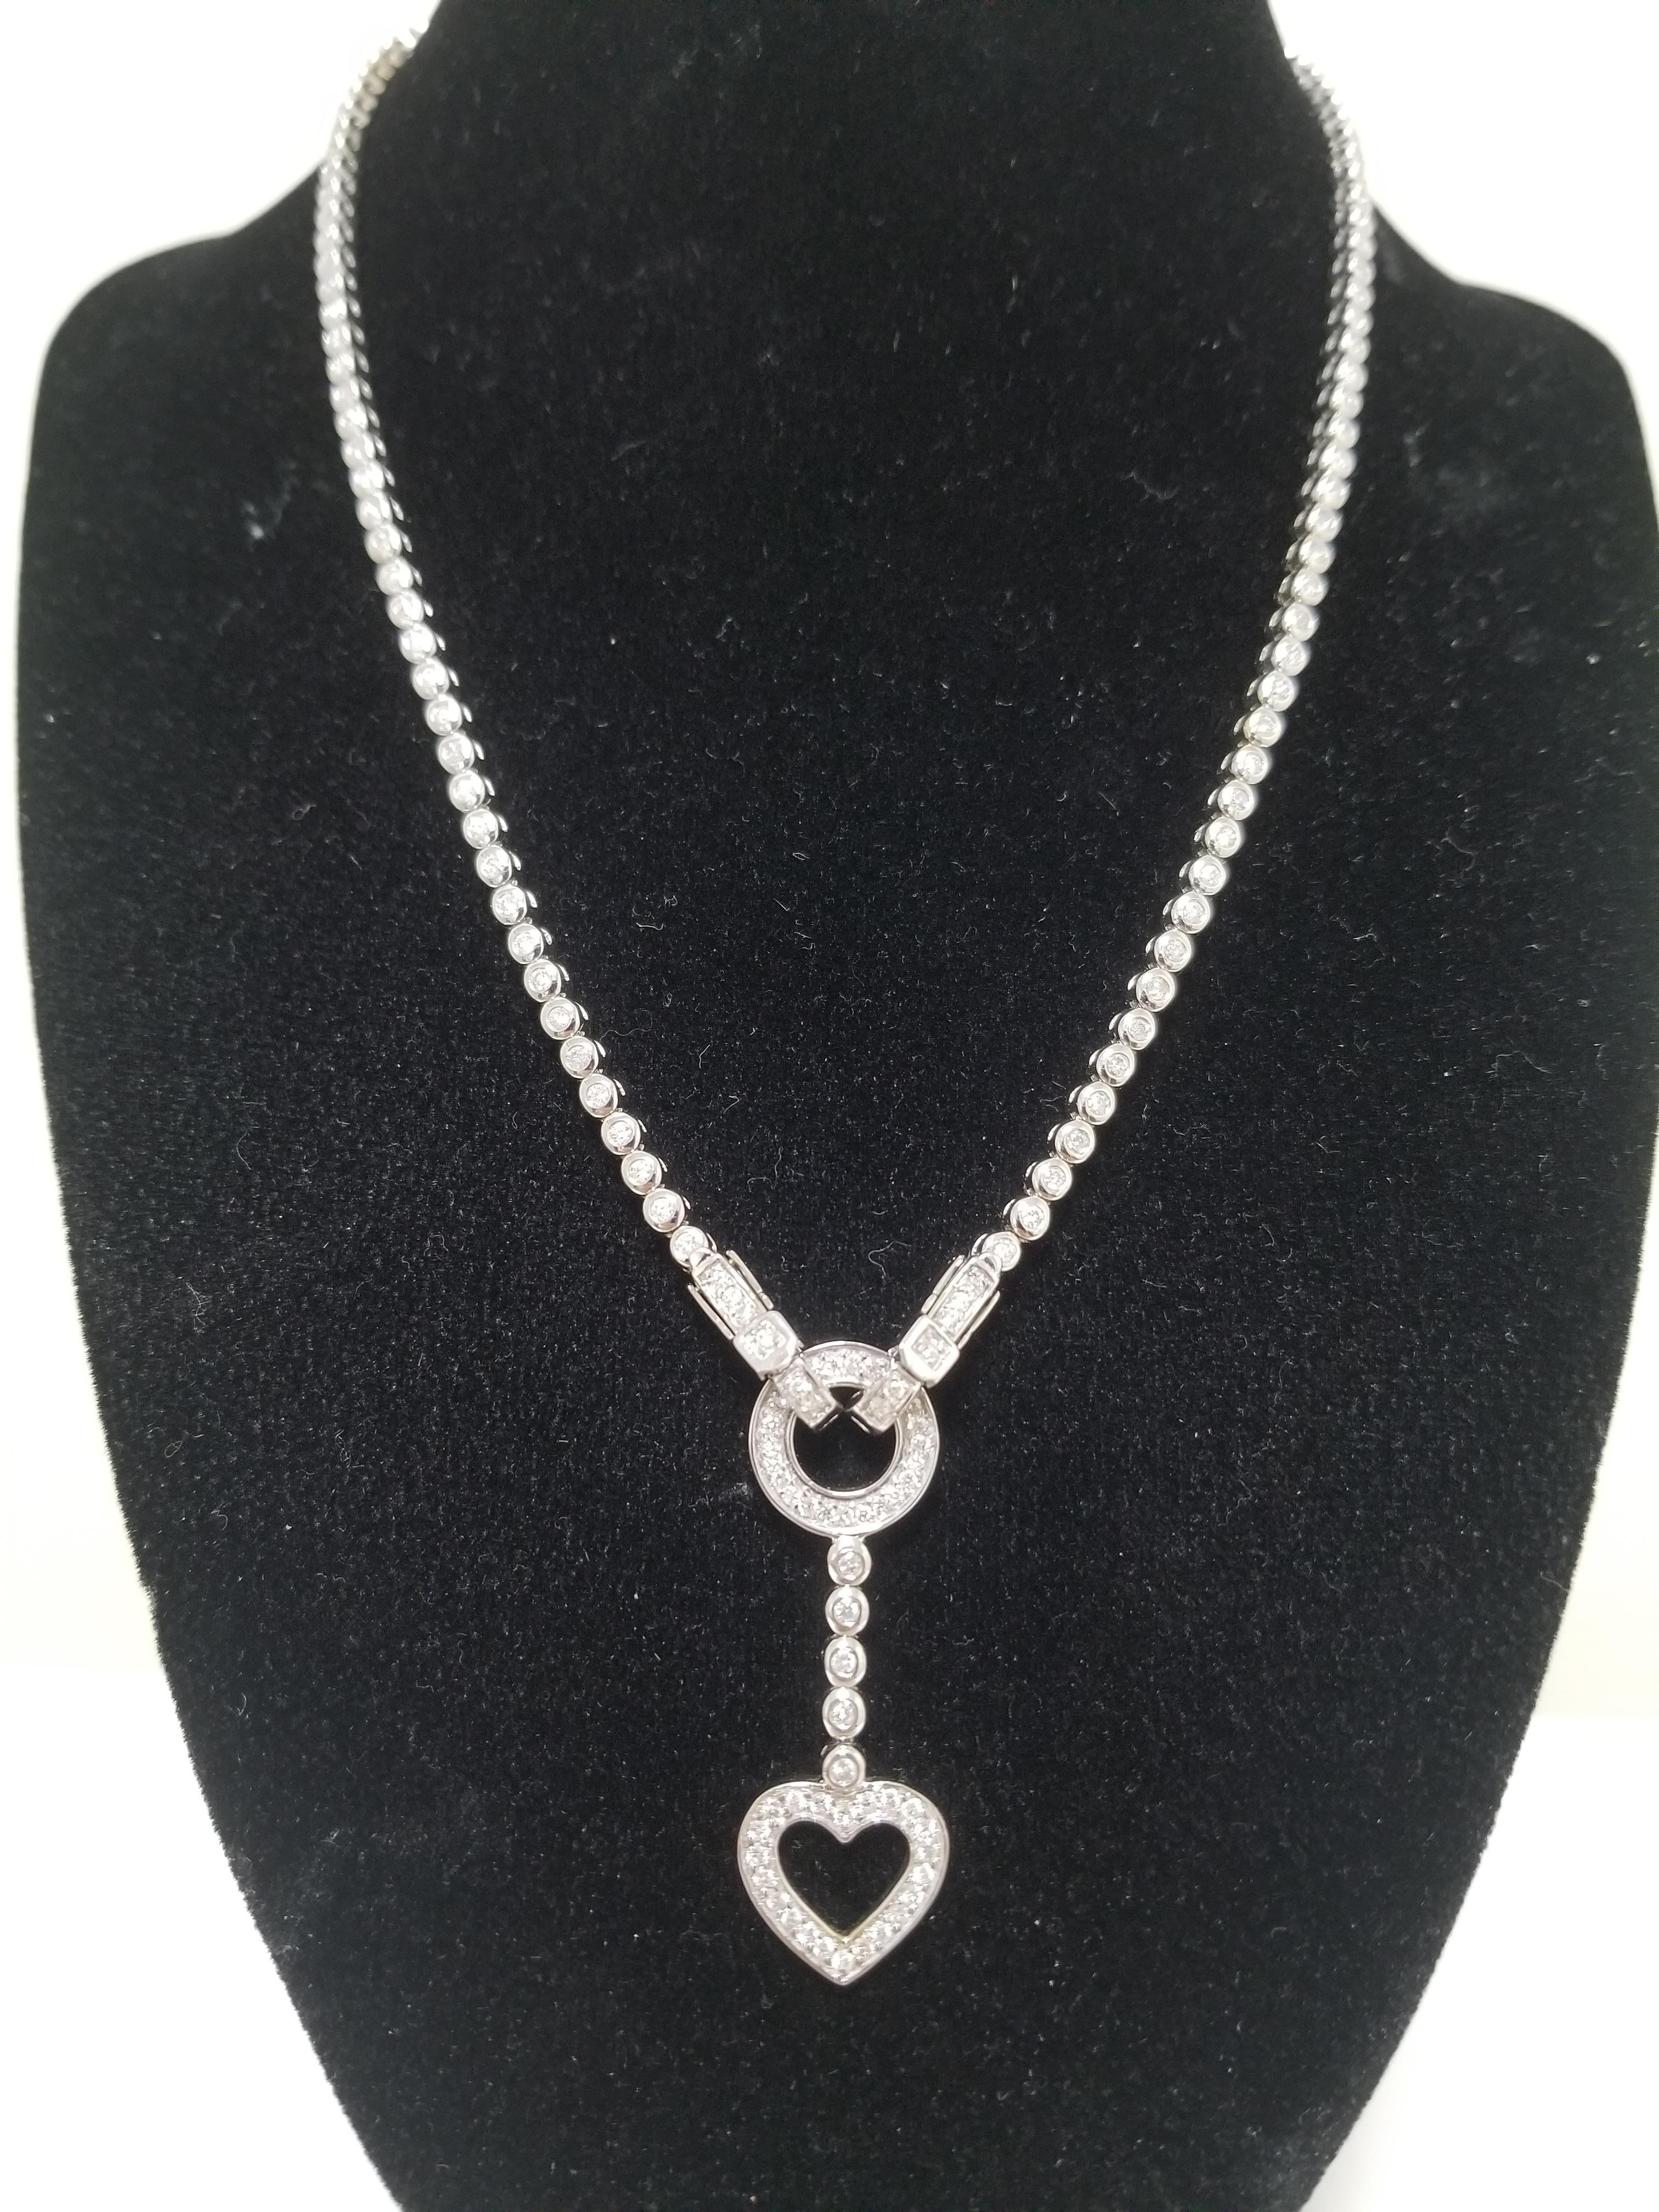 Beautiful look special diamond heart shape pendant 14k white gold. 16 inch chain, plus the drop is 1.5 inch. average Color I, Clarity SI, 31 grams. 179 pieces of natural diamonds. Total 3.85ct. Adorn every way. Great gift for this holiday!